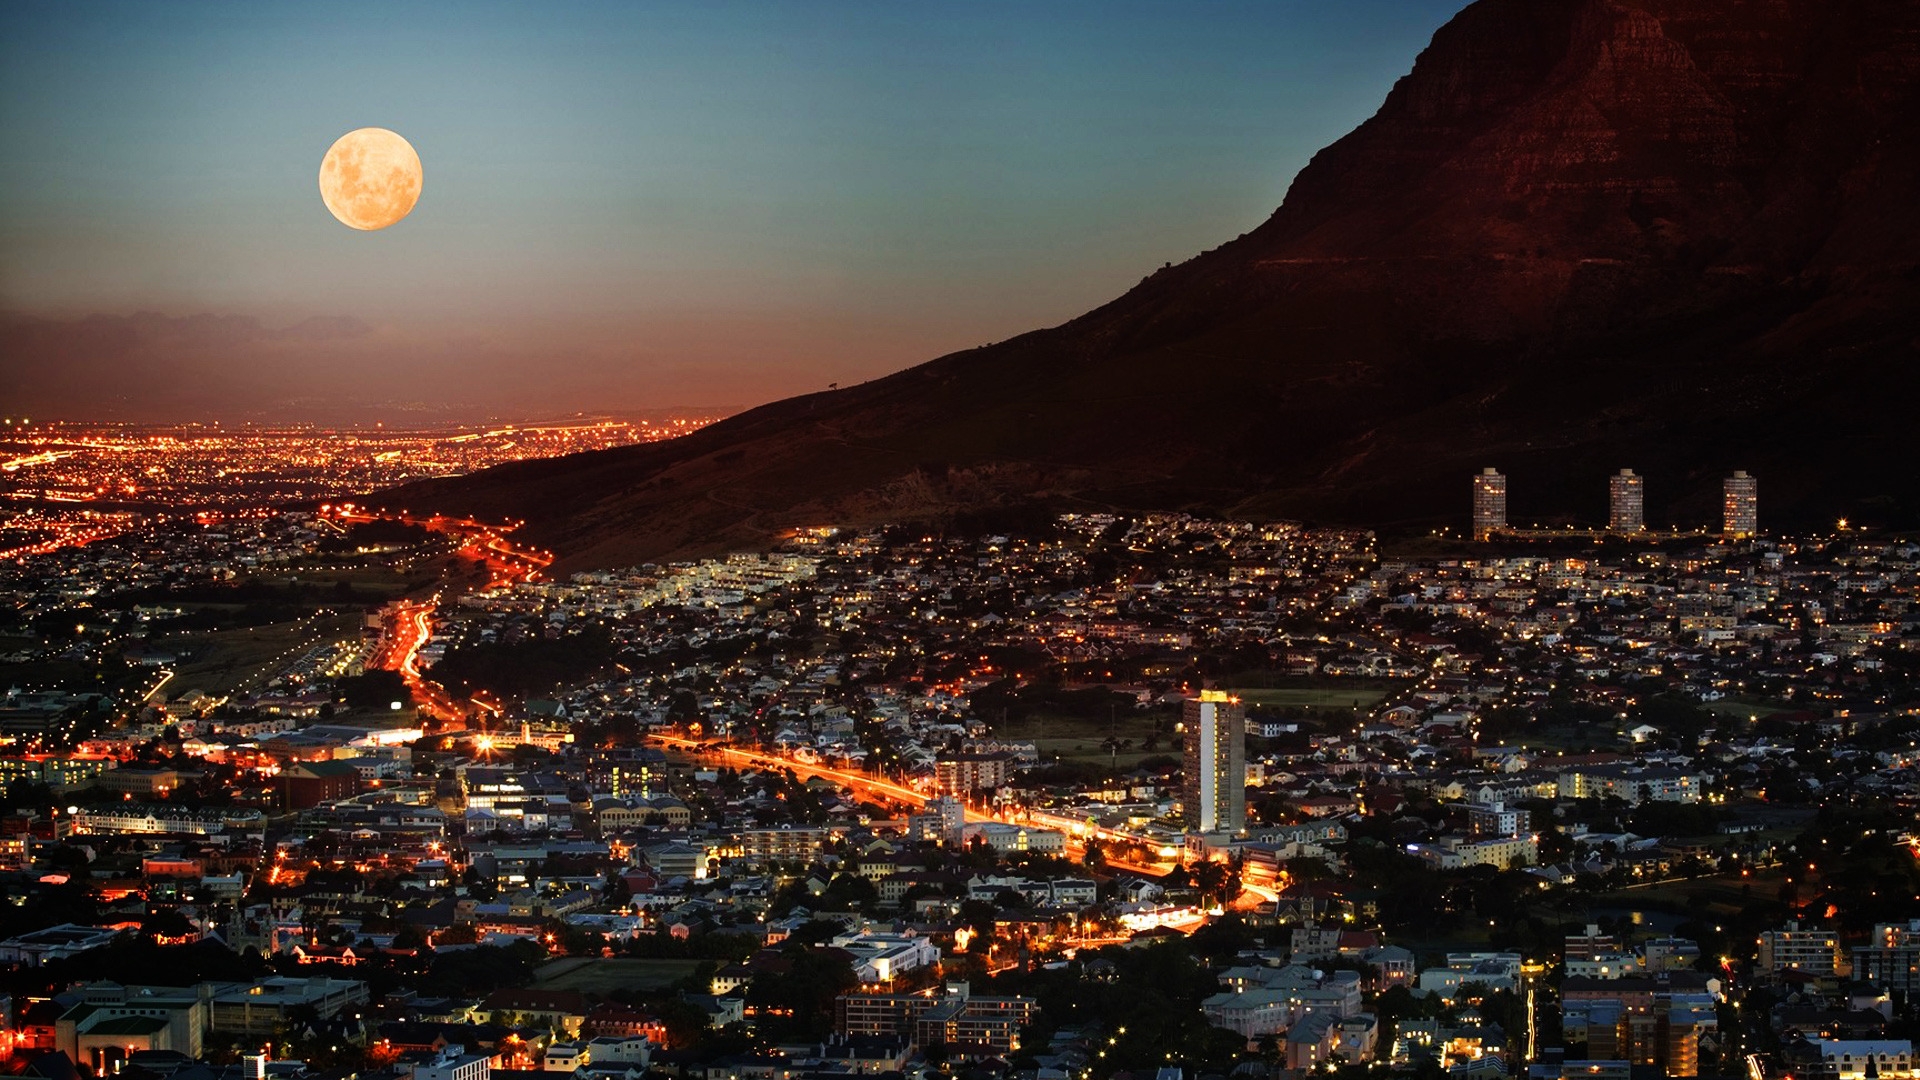 South Africa Night for 1920 x 1080 HDTV 1080p resolution